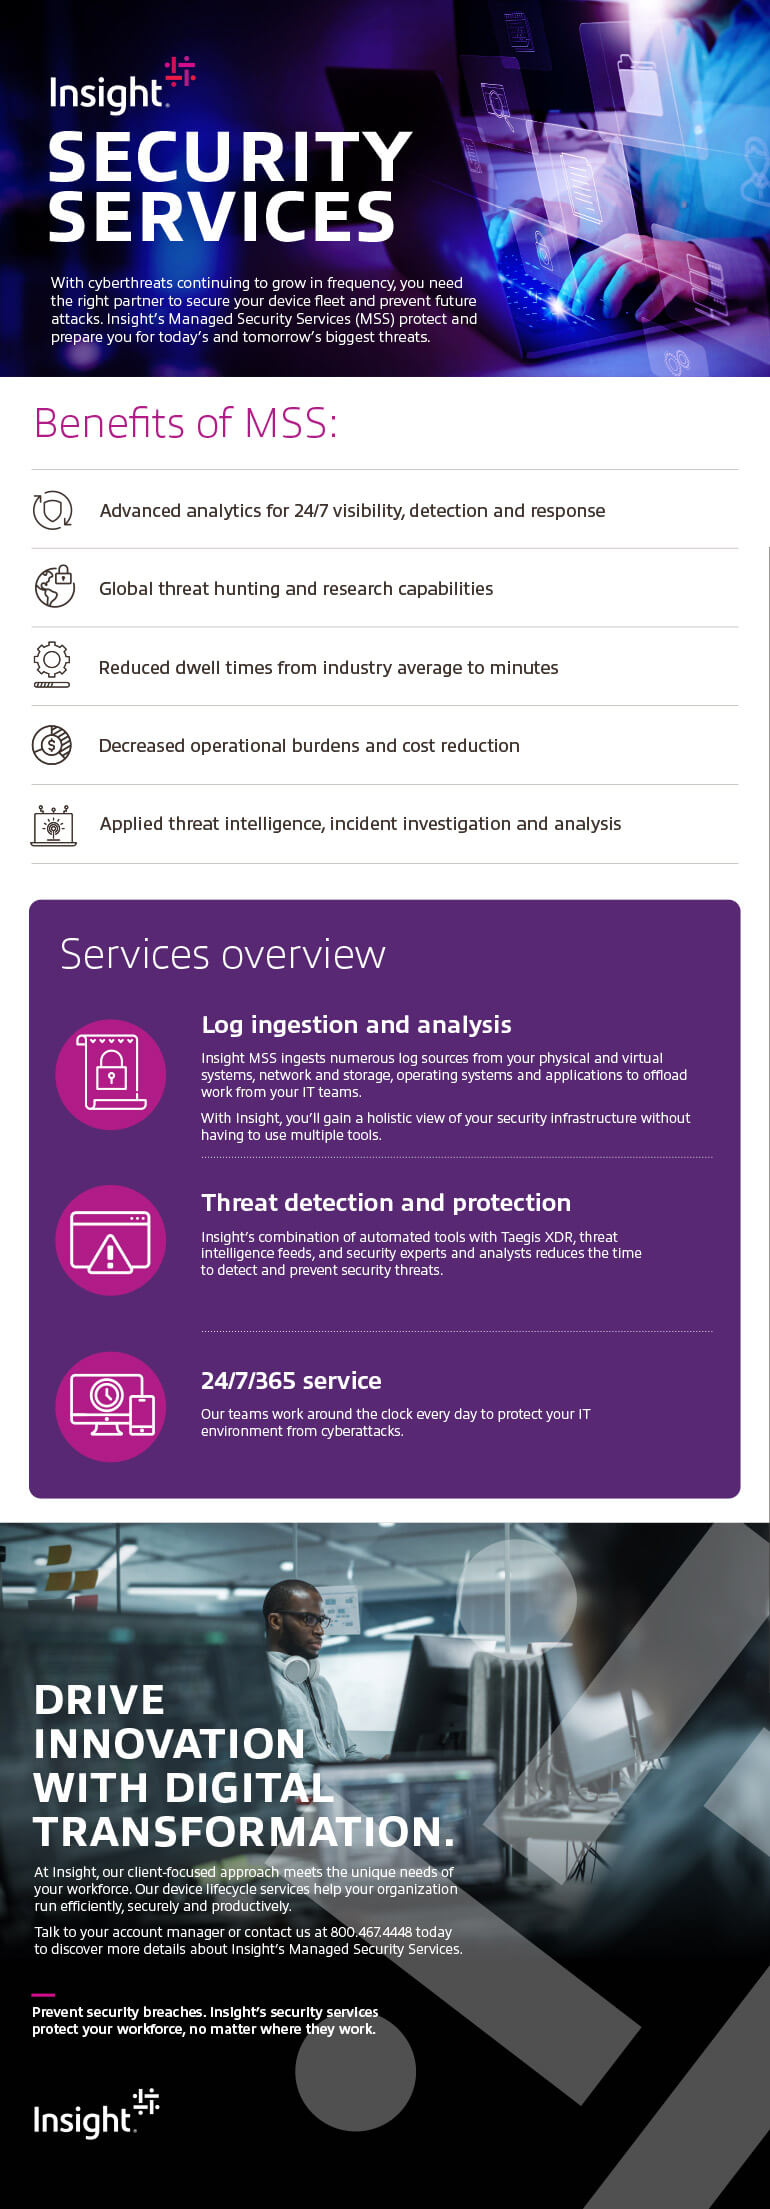 Insight Device Lifecycle Security Services infographic as transcribed below